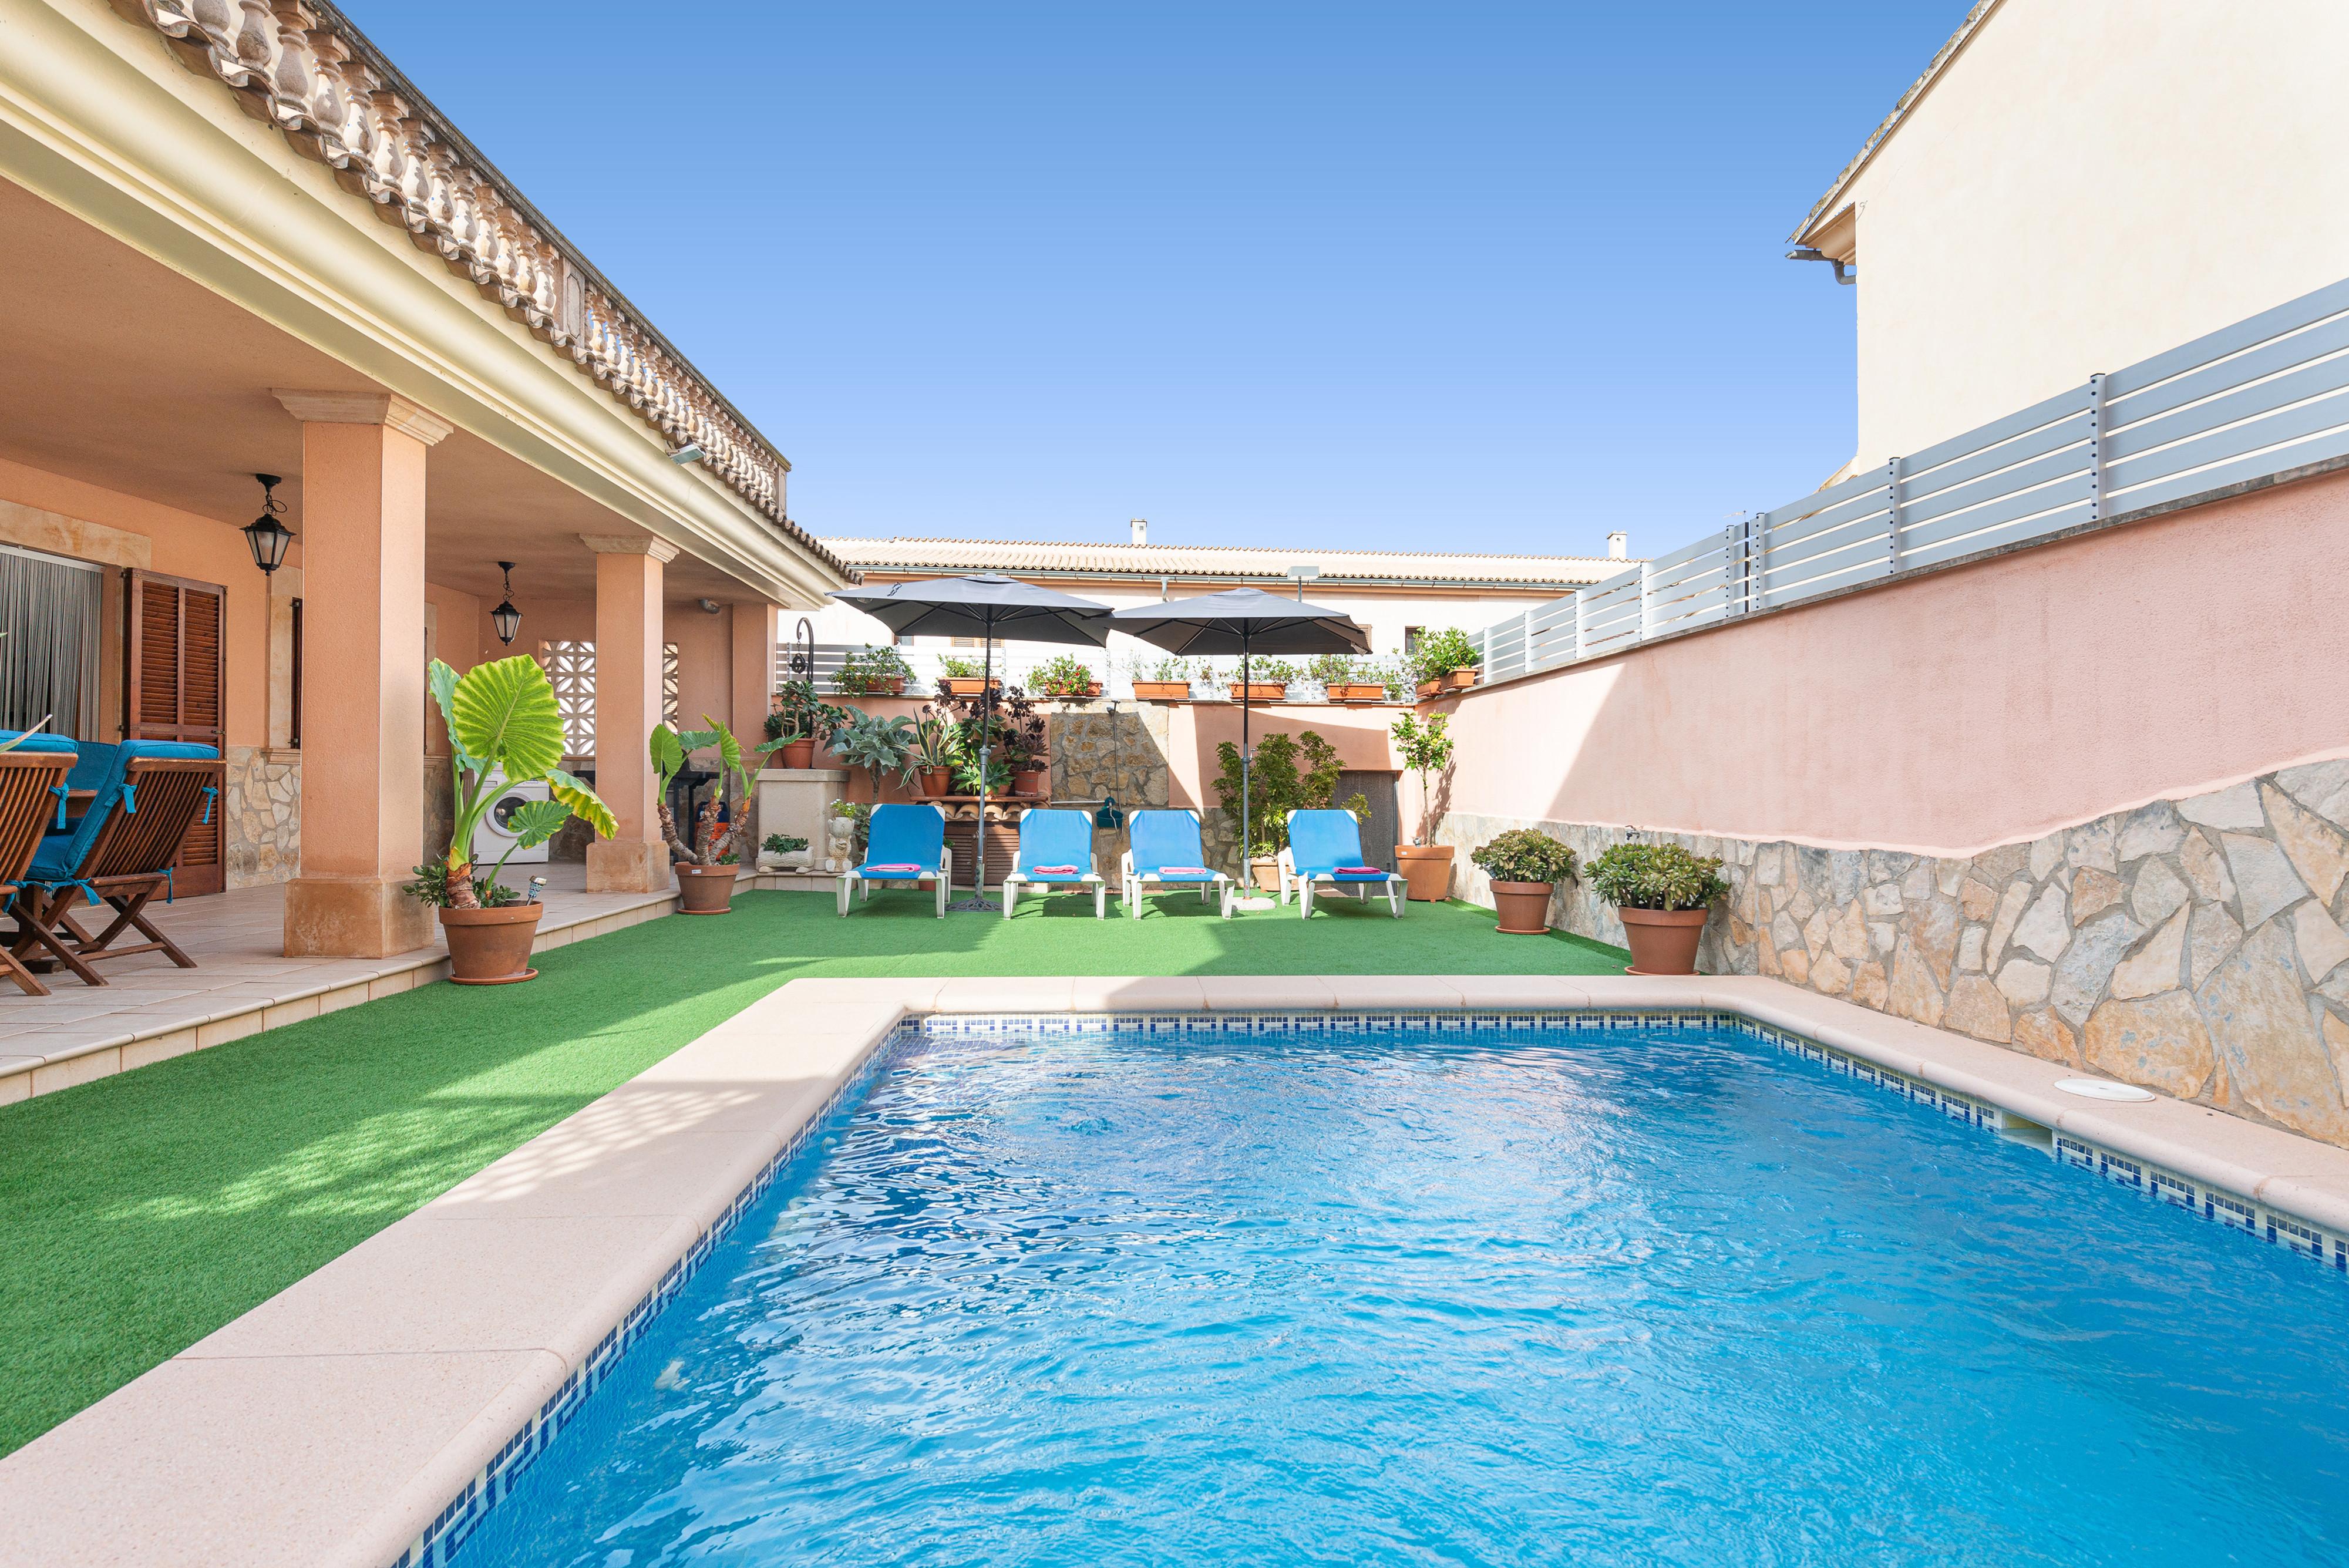 Property Image 1 - CAS BARBER - Villa with private pool in MURO. Free WiFi